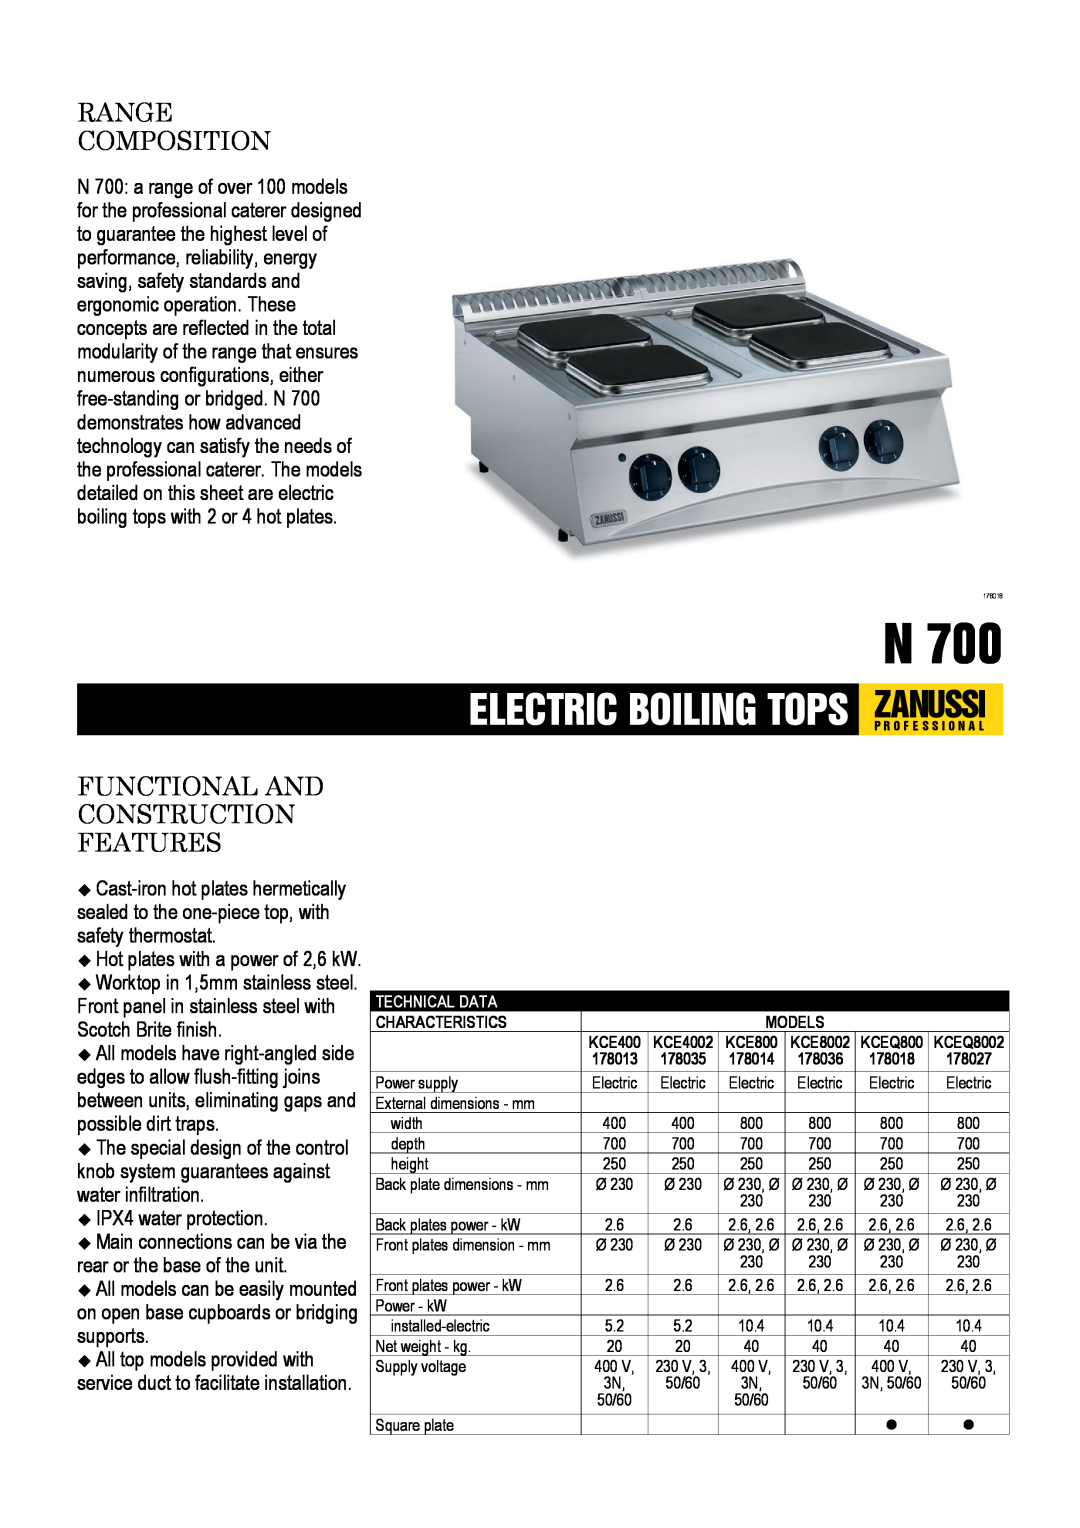 Zanussi KCE4002, KCE8002, KCEQ8002, 178018 dimensions Range Composition, Functional And Construction Features 